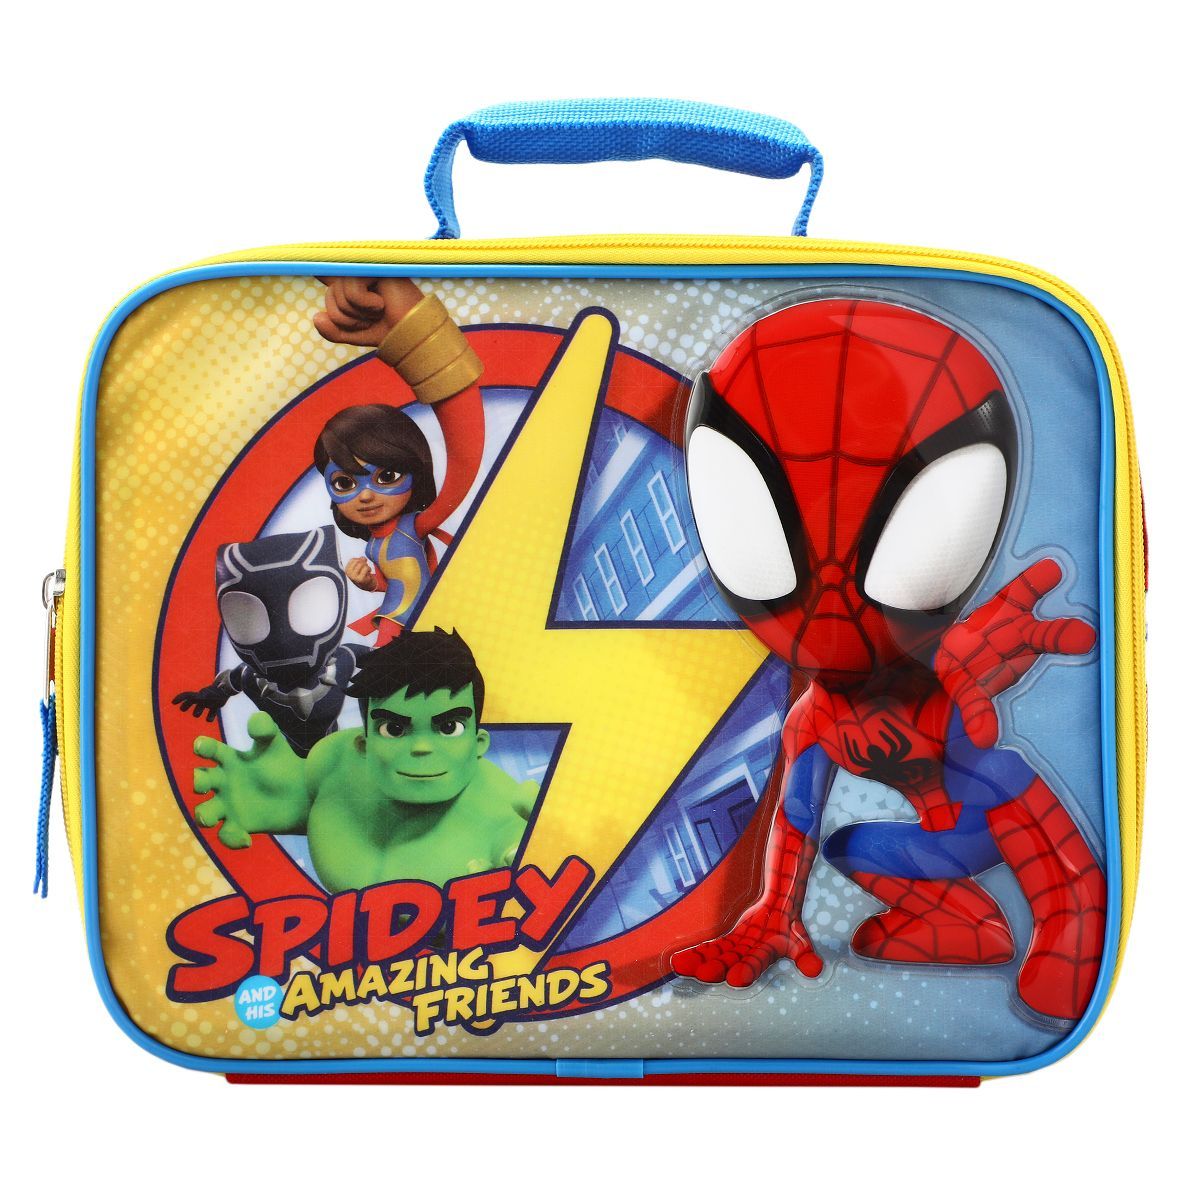 Spidey and Friends Superheroes Kids Lunch box | Target